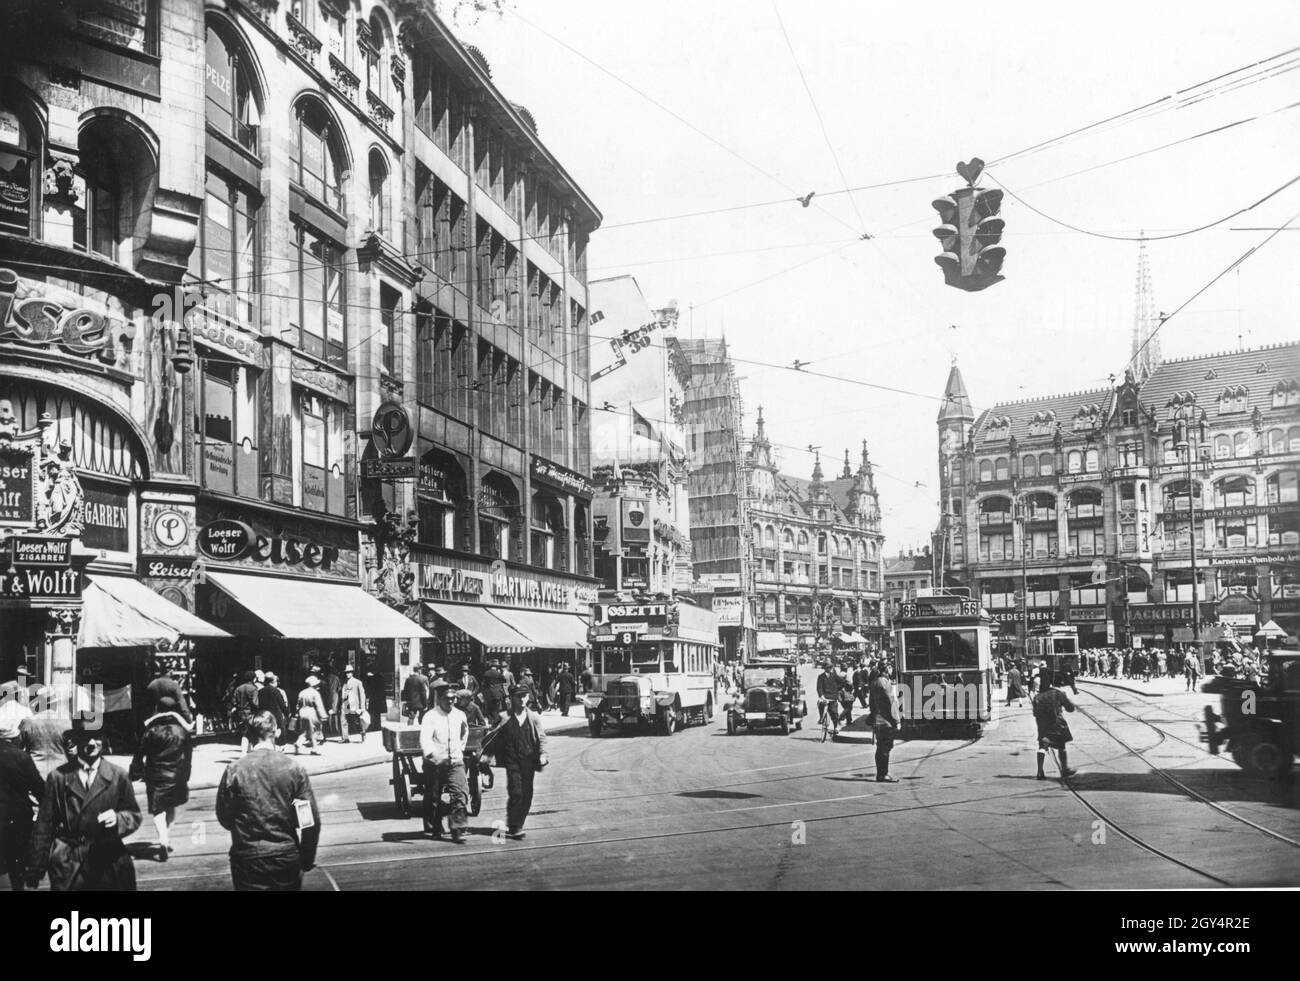 'The photograph shows the busy Spittelmarkt in Berlin-Mitte in 1928. On the left is a branch of the cigar brand ''Loeser und Wolff'' and the shoe shop ''Leiser''. The spire of St. Peter's Church can be seen in the background on the right. [automated translation]' Stock Photo